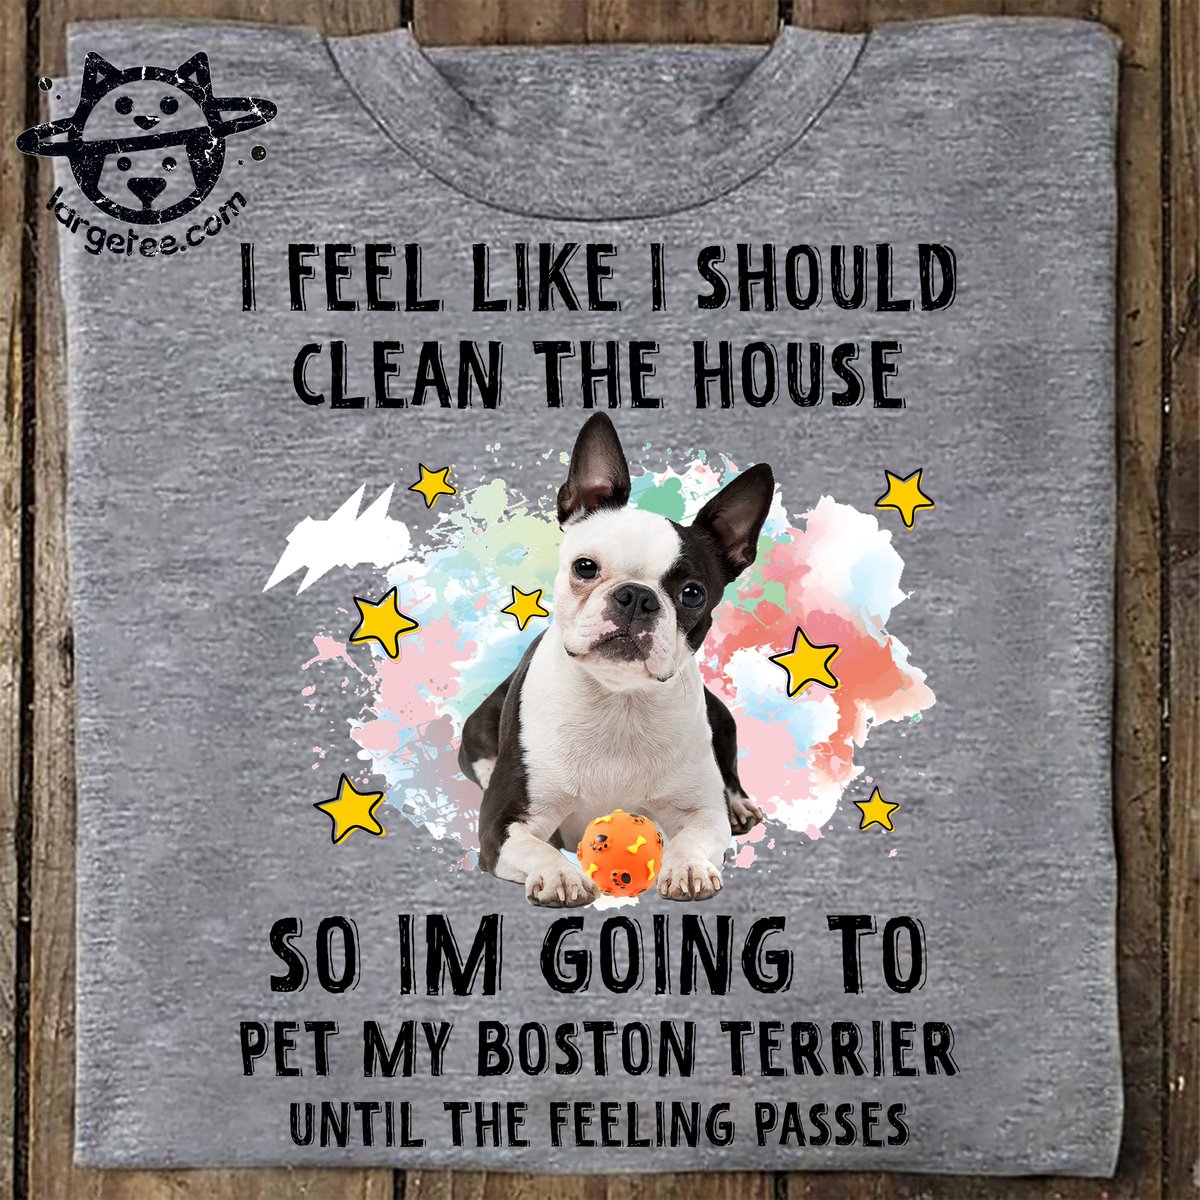 I feel like I should clean the house so I'm going to pet my Boston Terrier - Dog lover